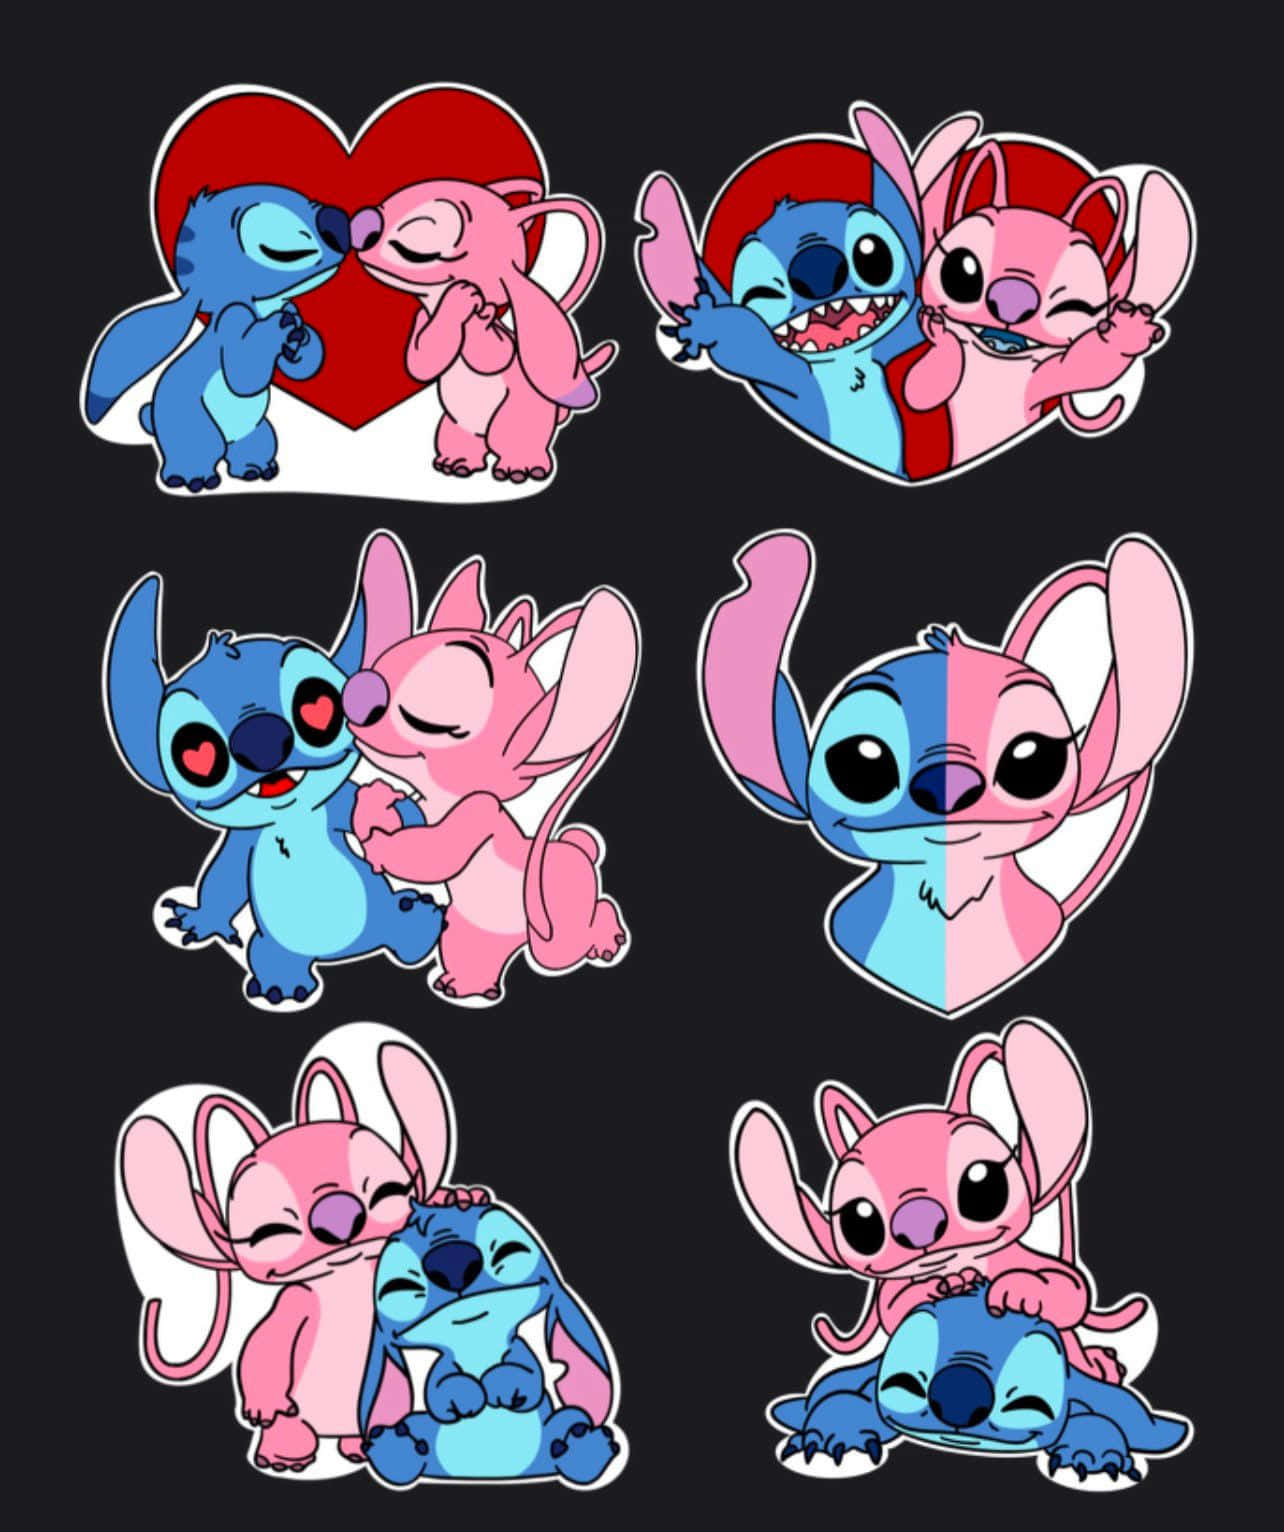 Stitch and Angel's Loving Moment Wallpaper